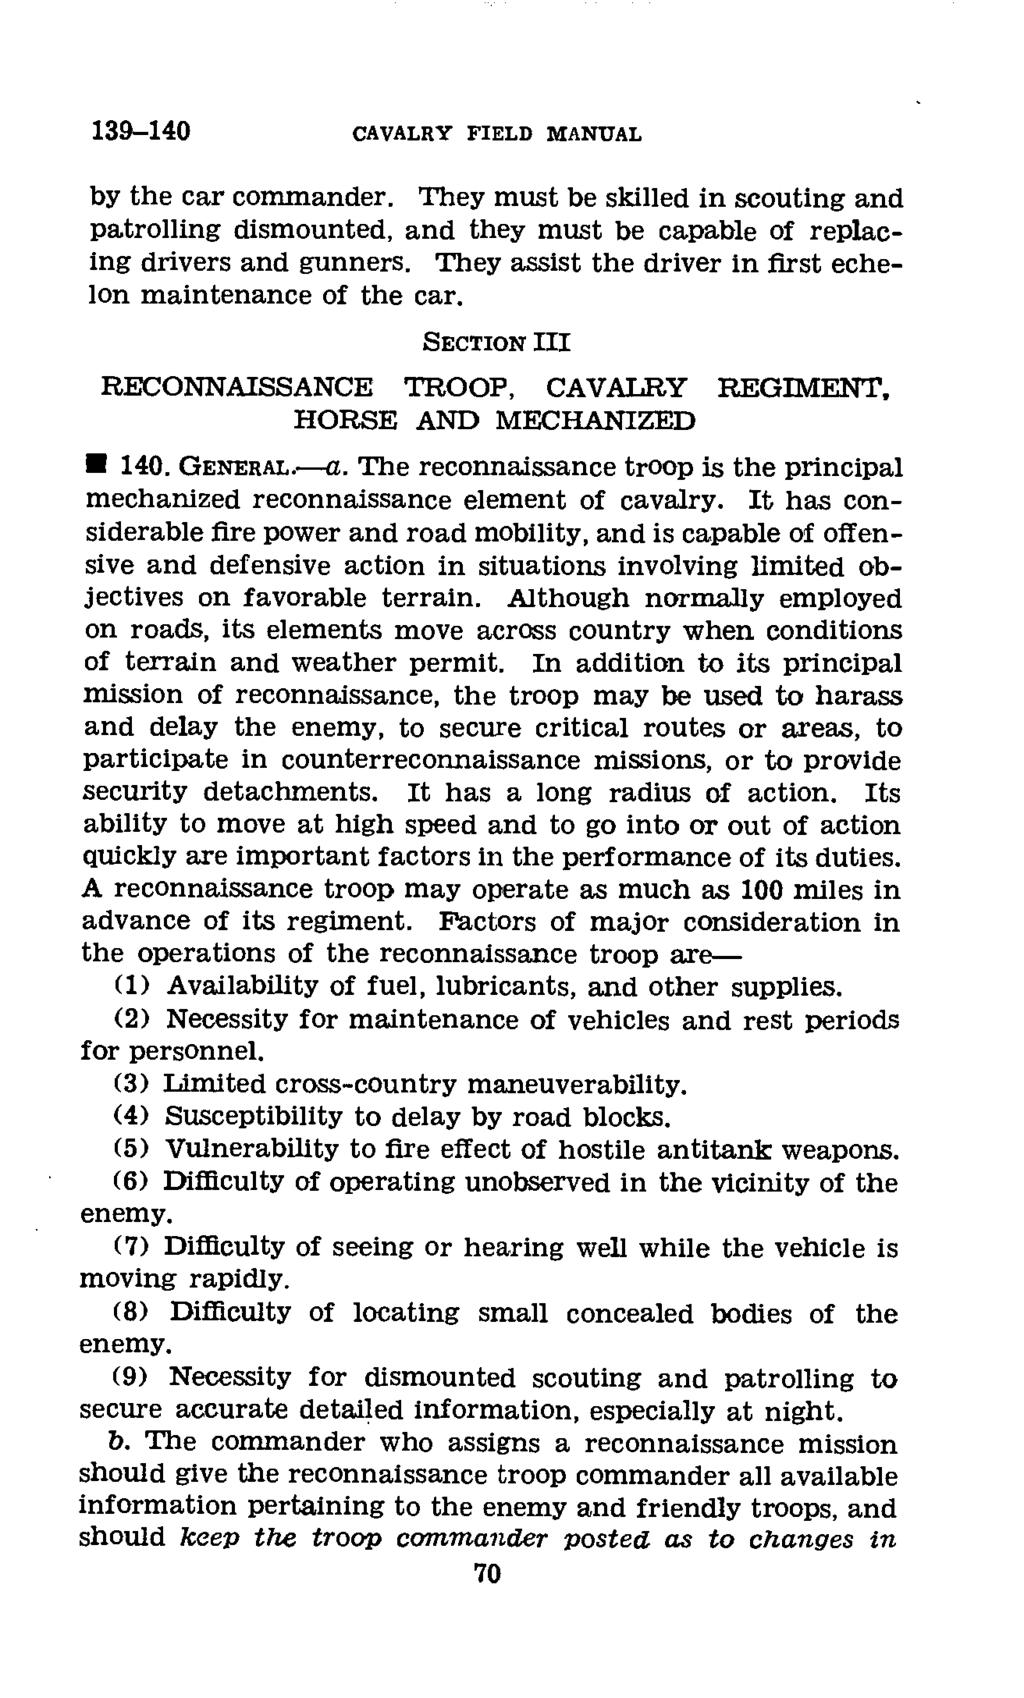 139-140 CAVALRY FIELD MANUAL by the car commander. They must be skilled in scouting and patrolling dismounted, and they must be capable of replacing drivers and gunners.